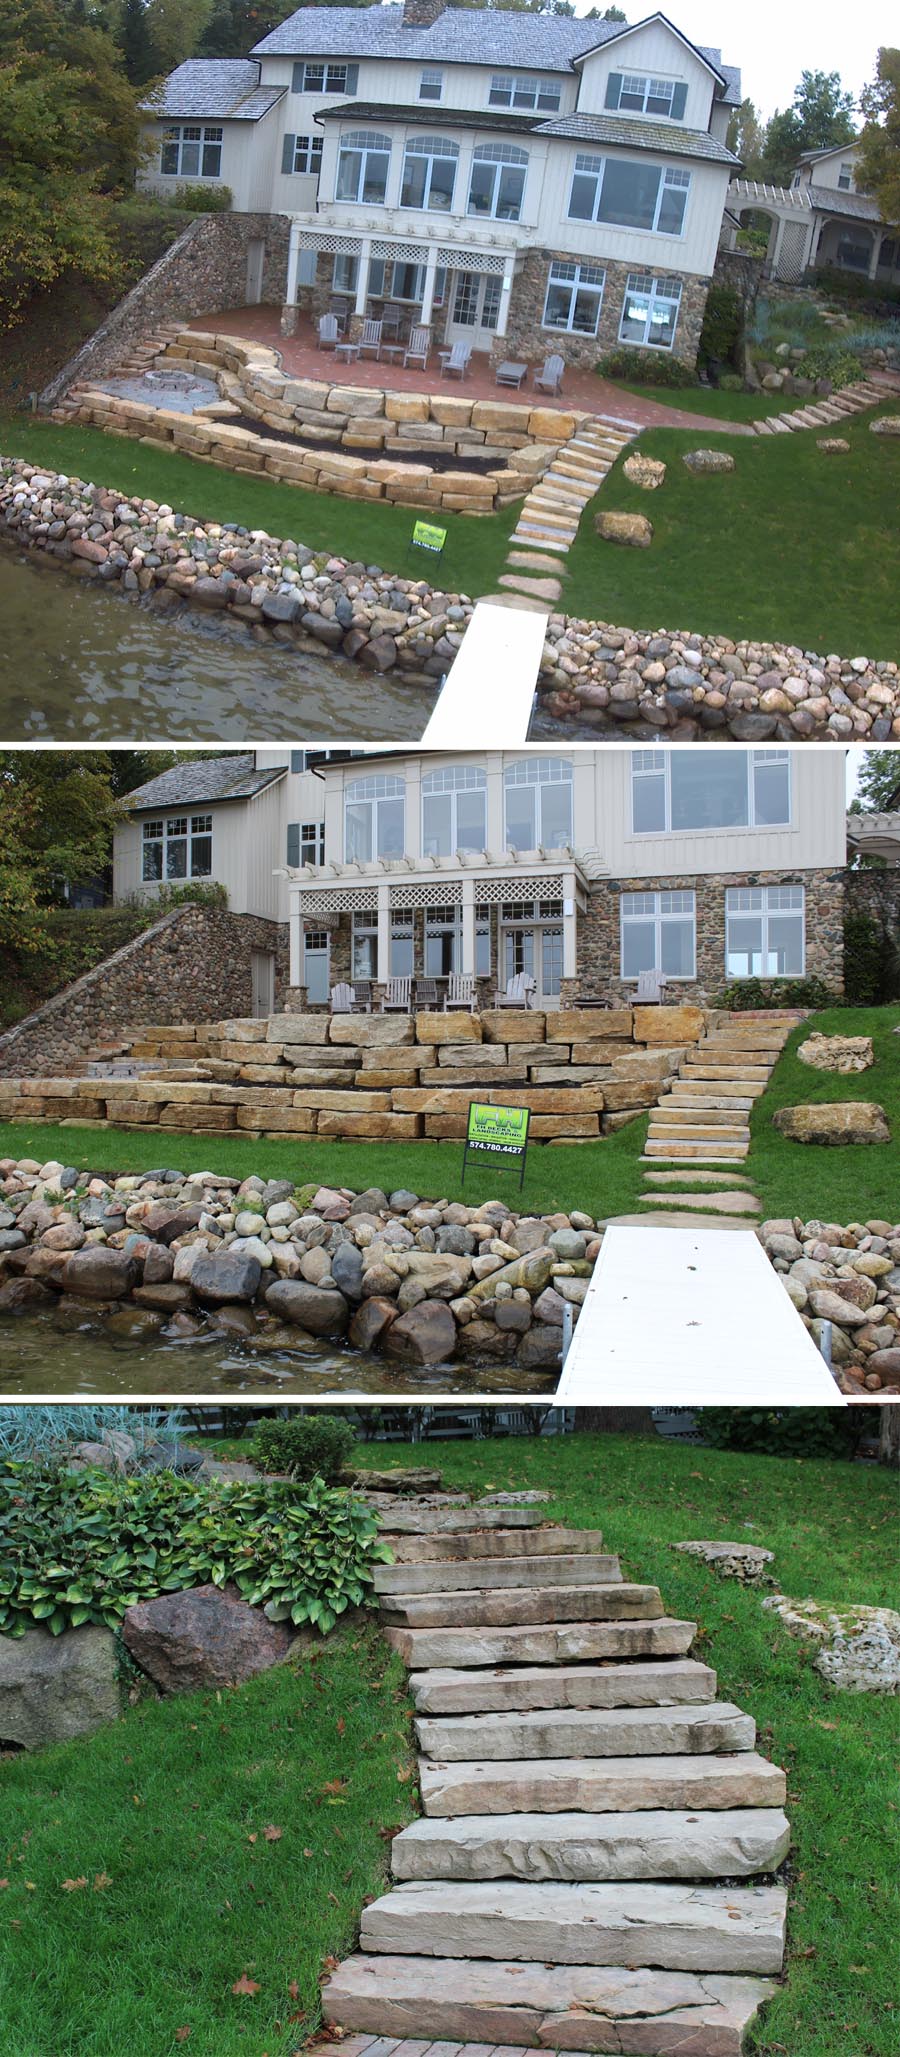 fh decks and landscaping graphic image